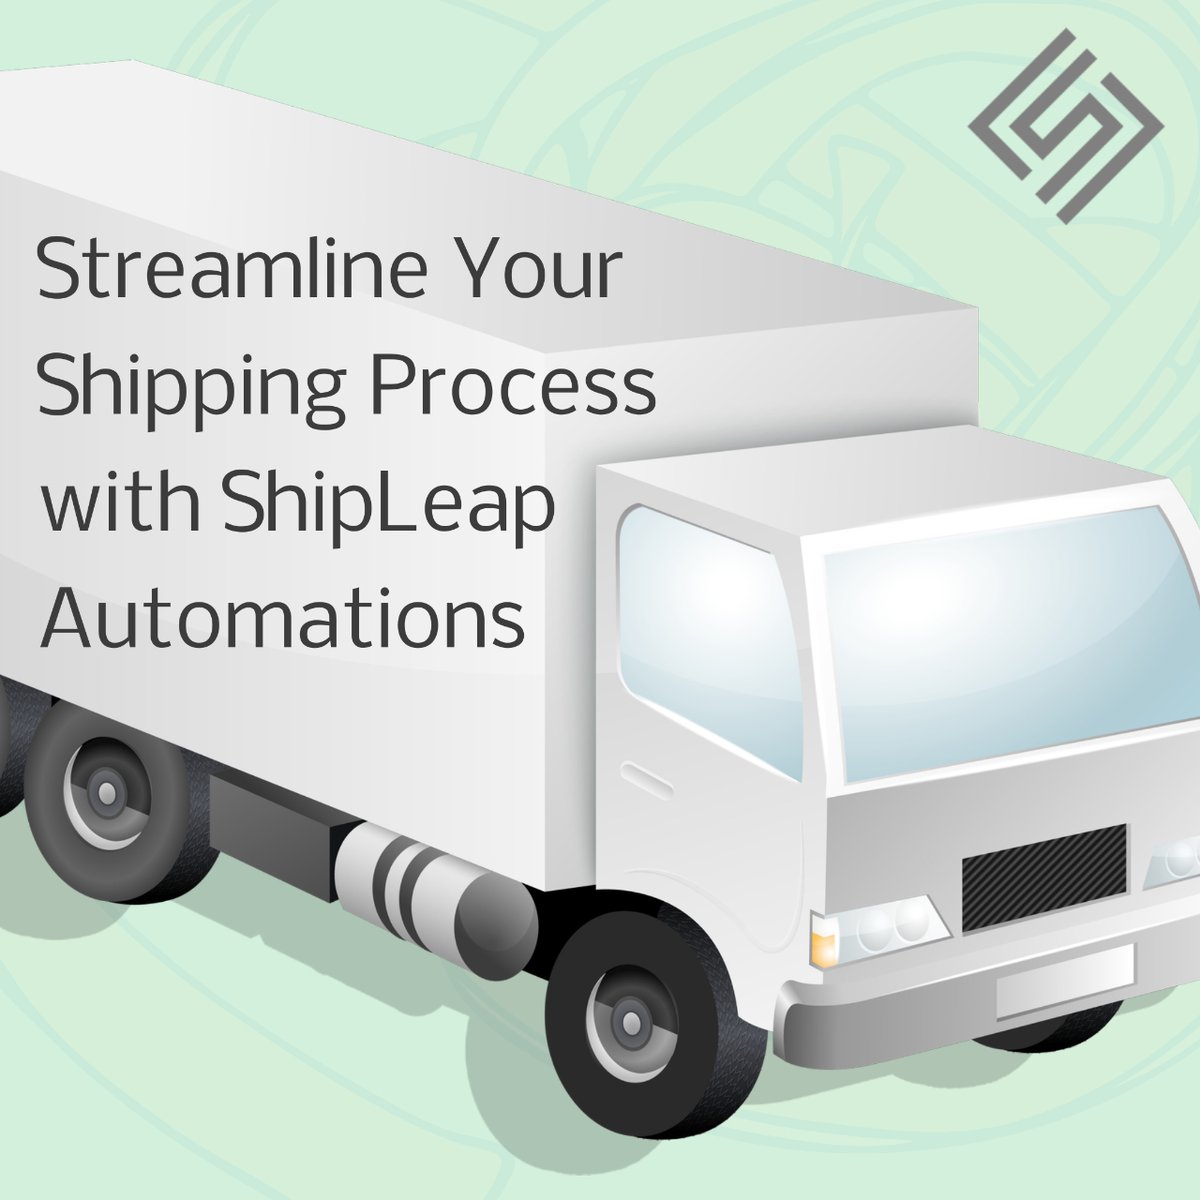 Streamline Your Shipping Process with ShipLeap Automations #shippingsoftware #shippingindustry #shippingnews #parcelshipping #parcels #parceldelivery #smartshipping #shipping #technology #automation